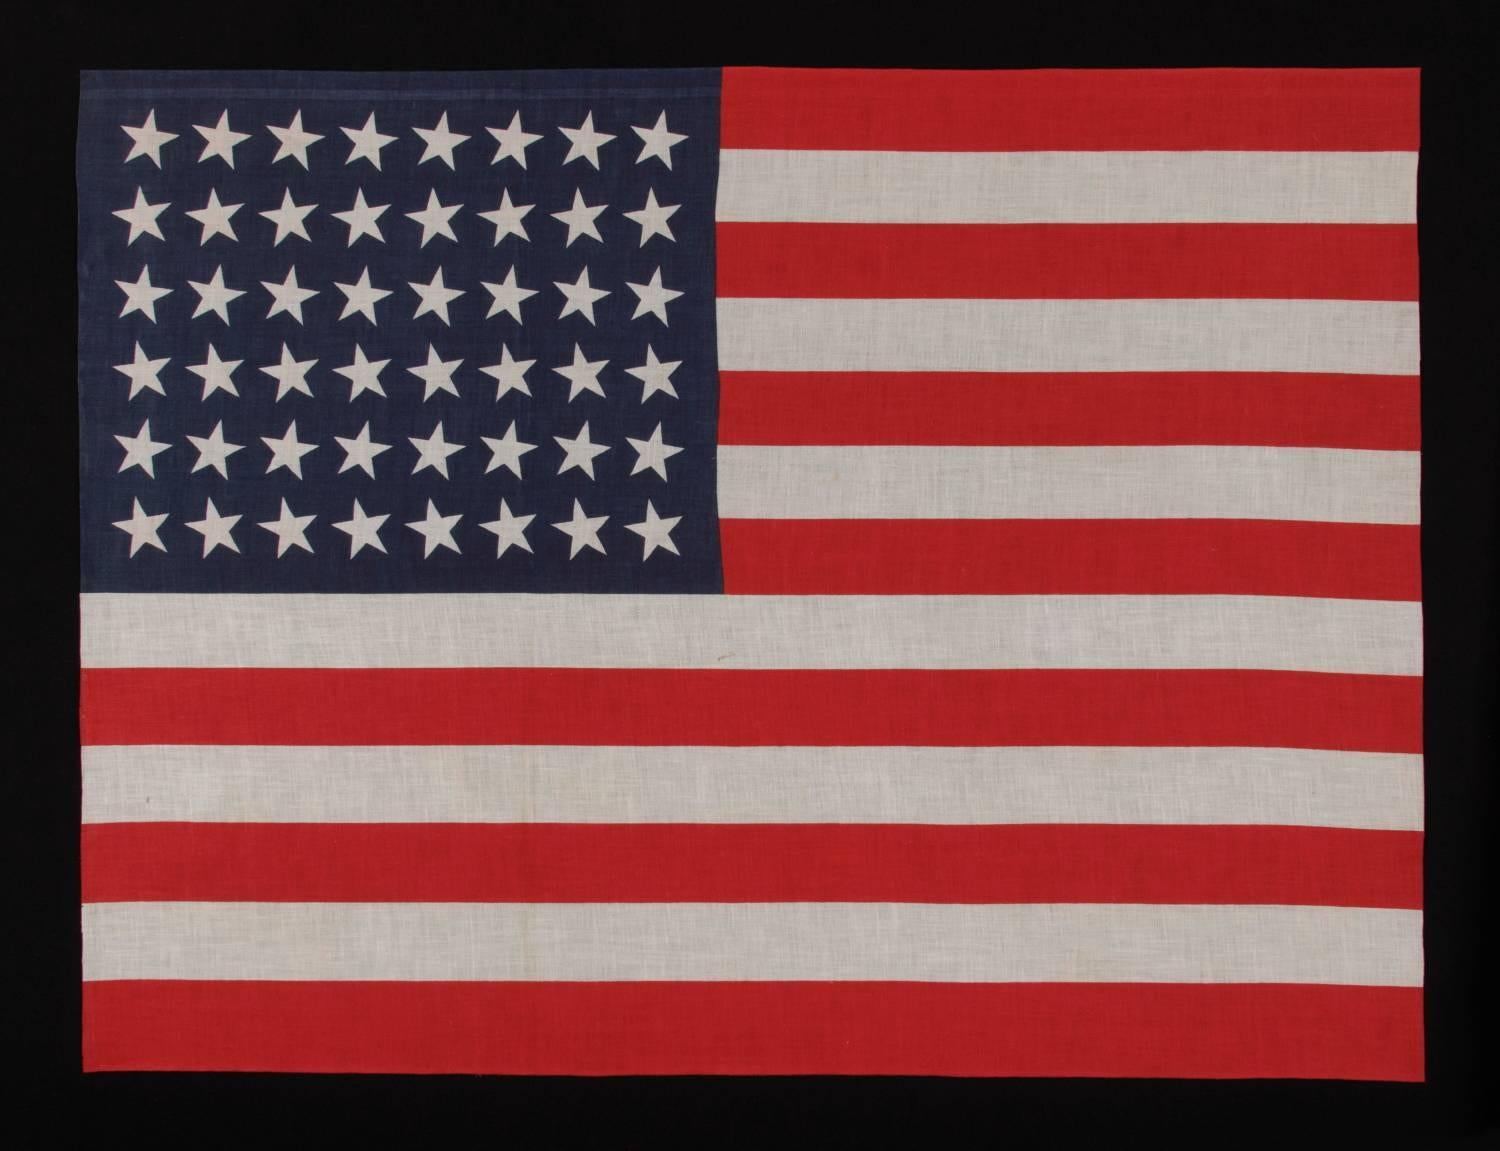 48 STARS IN DANCING ROWS, A RARE VARIETY OF ANTIQUE AMERICAN PARADE FLAG IN A LARGE SCALE, 1912-1918 OR PERHAPS EARLIER, ARIZONA & NEW MEXICO STATEHOOD  

In 1912, President Taft passed an executive order that dictated, for the first time, an